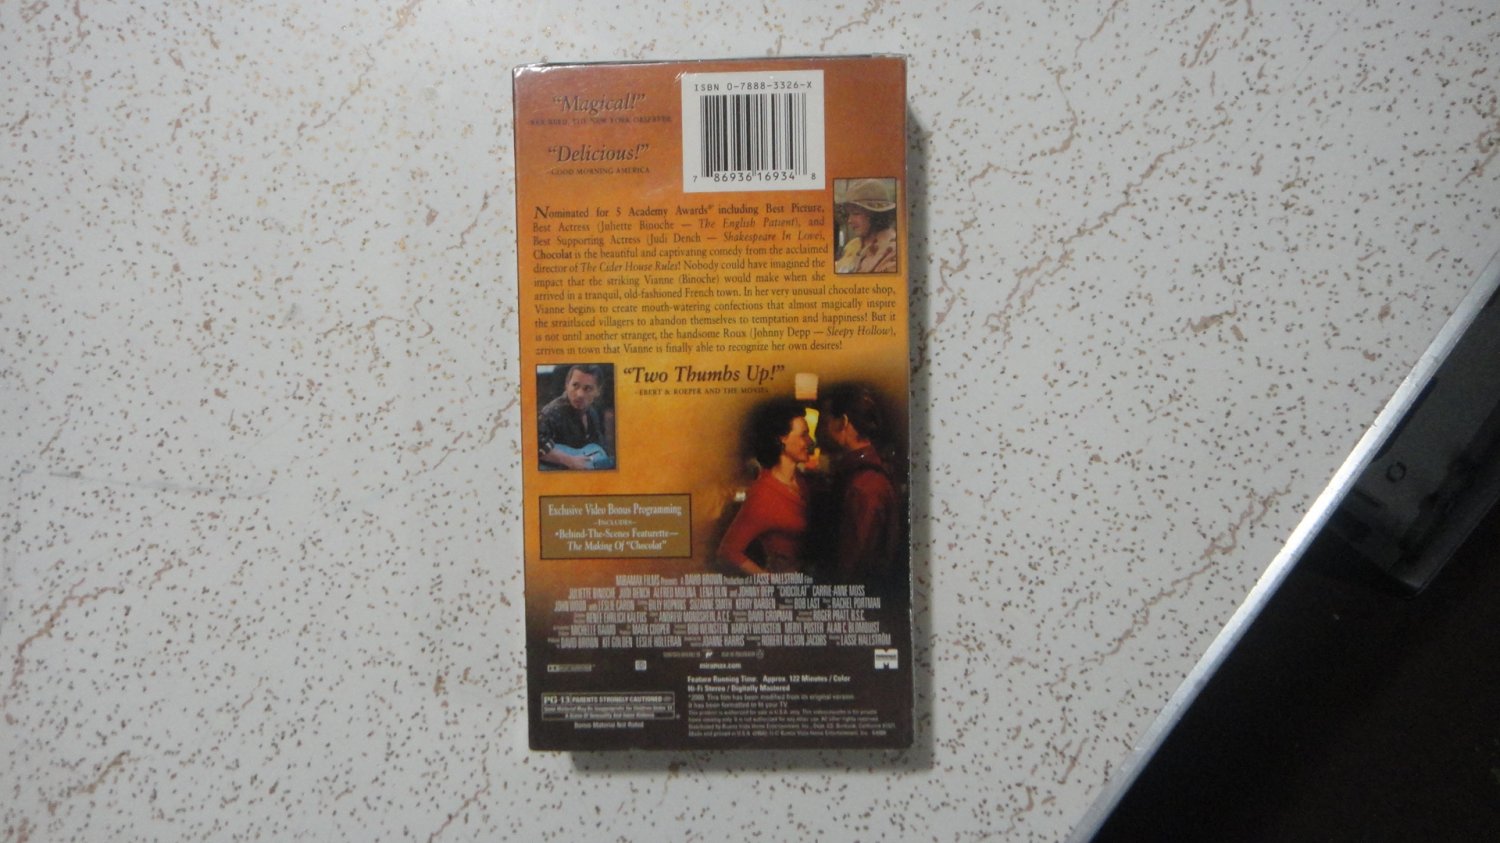 CHOCOLAT - VHS, Sealed and new...LooK!